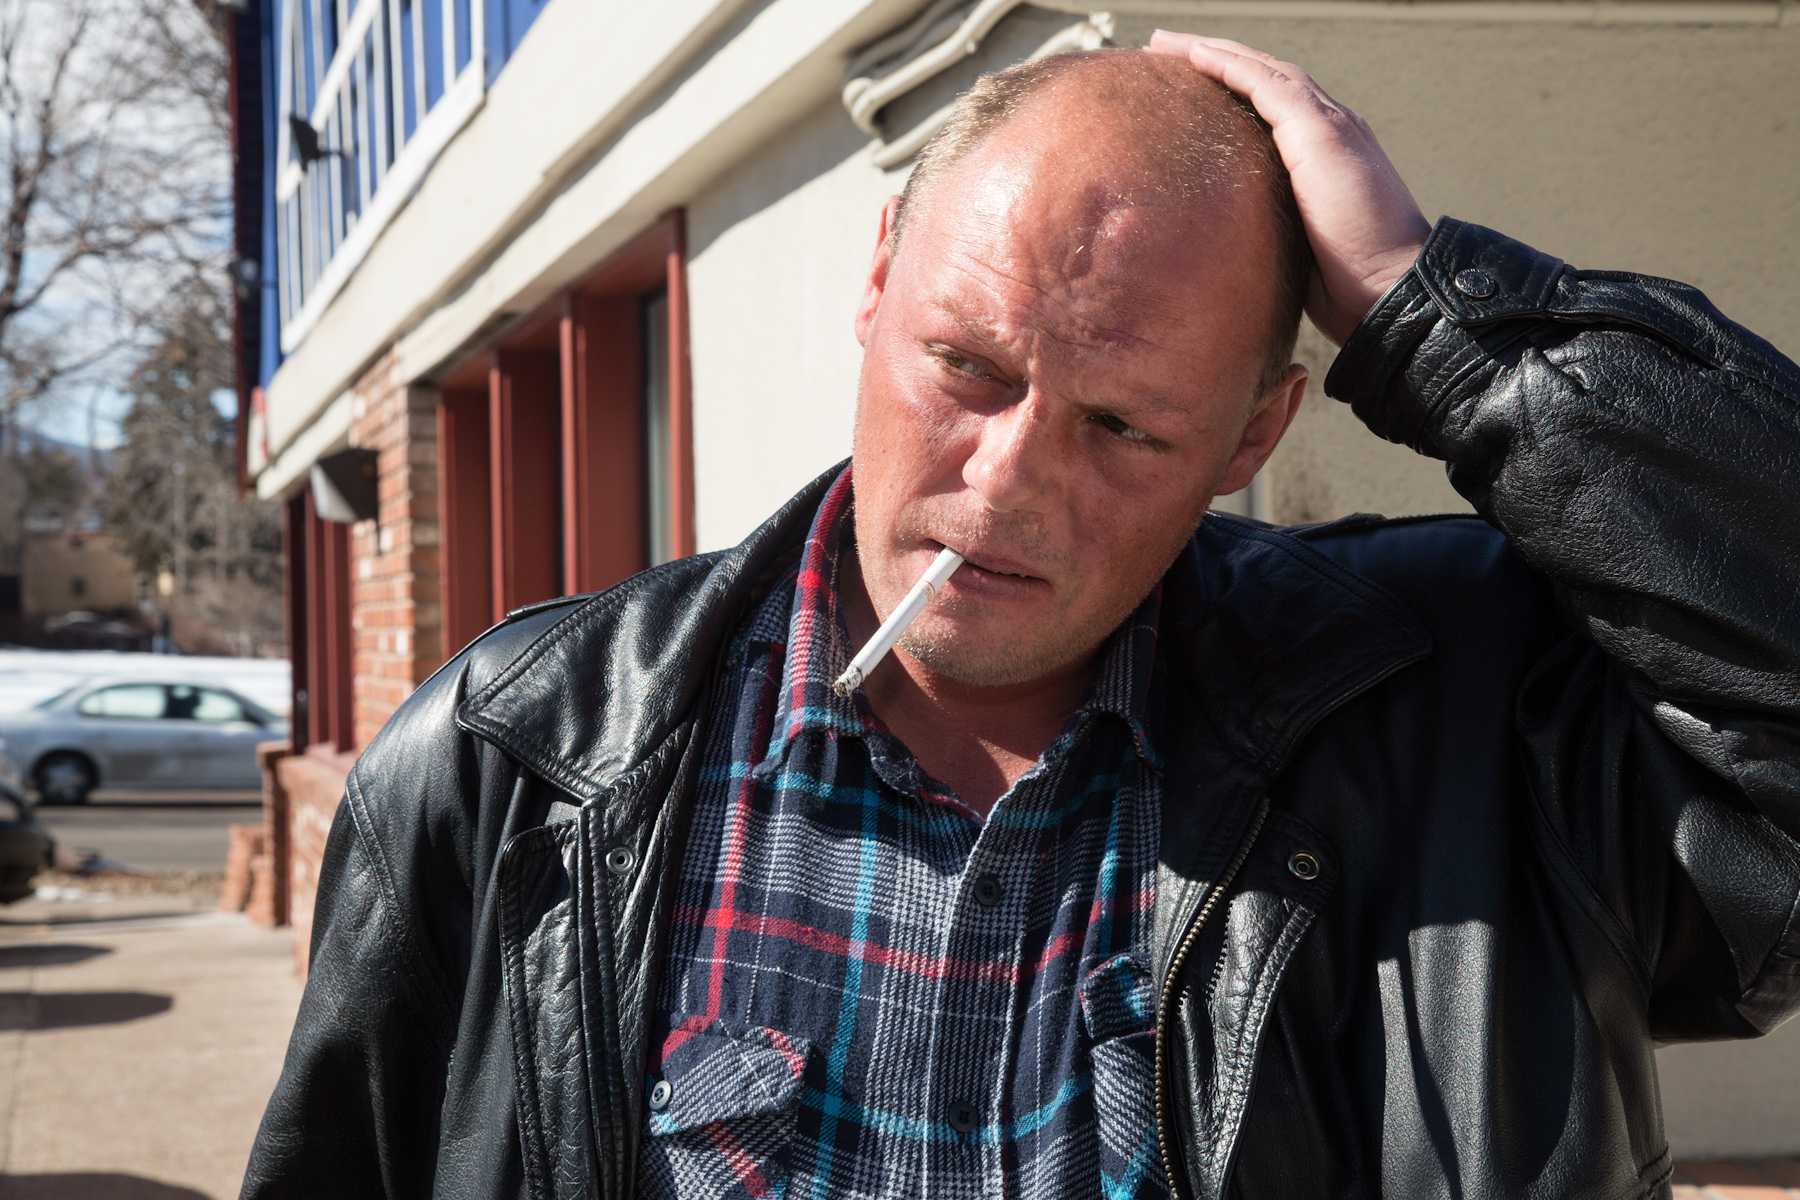 Fort Collins resident Todd Smith smokes a cigarette ouside of IHOP on College Ave. Wednesday. Smith has been a regualr to IHOP for the past 10 years, spending his days of sipping coffee and reading.